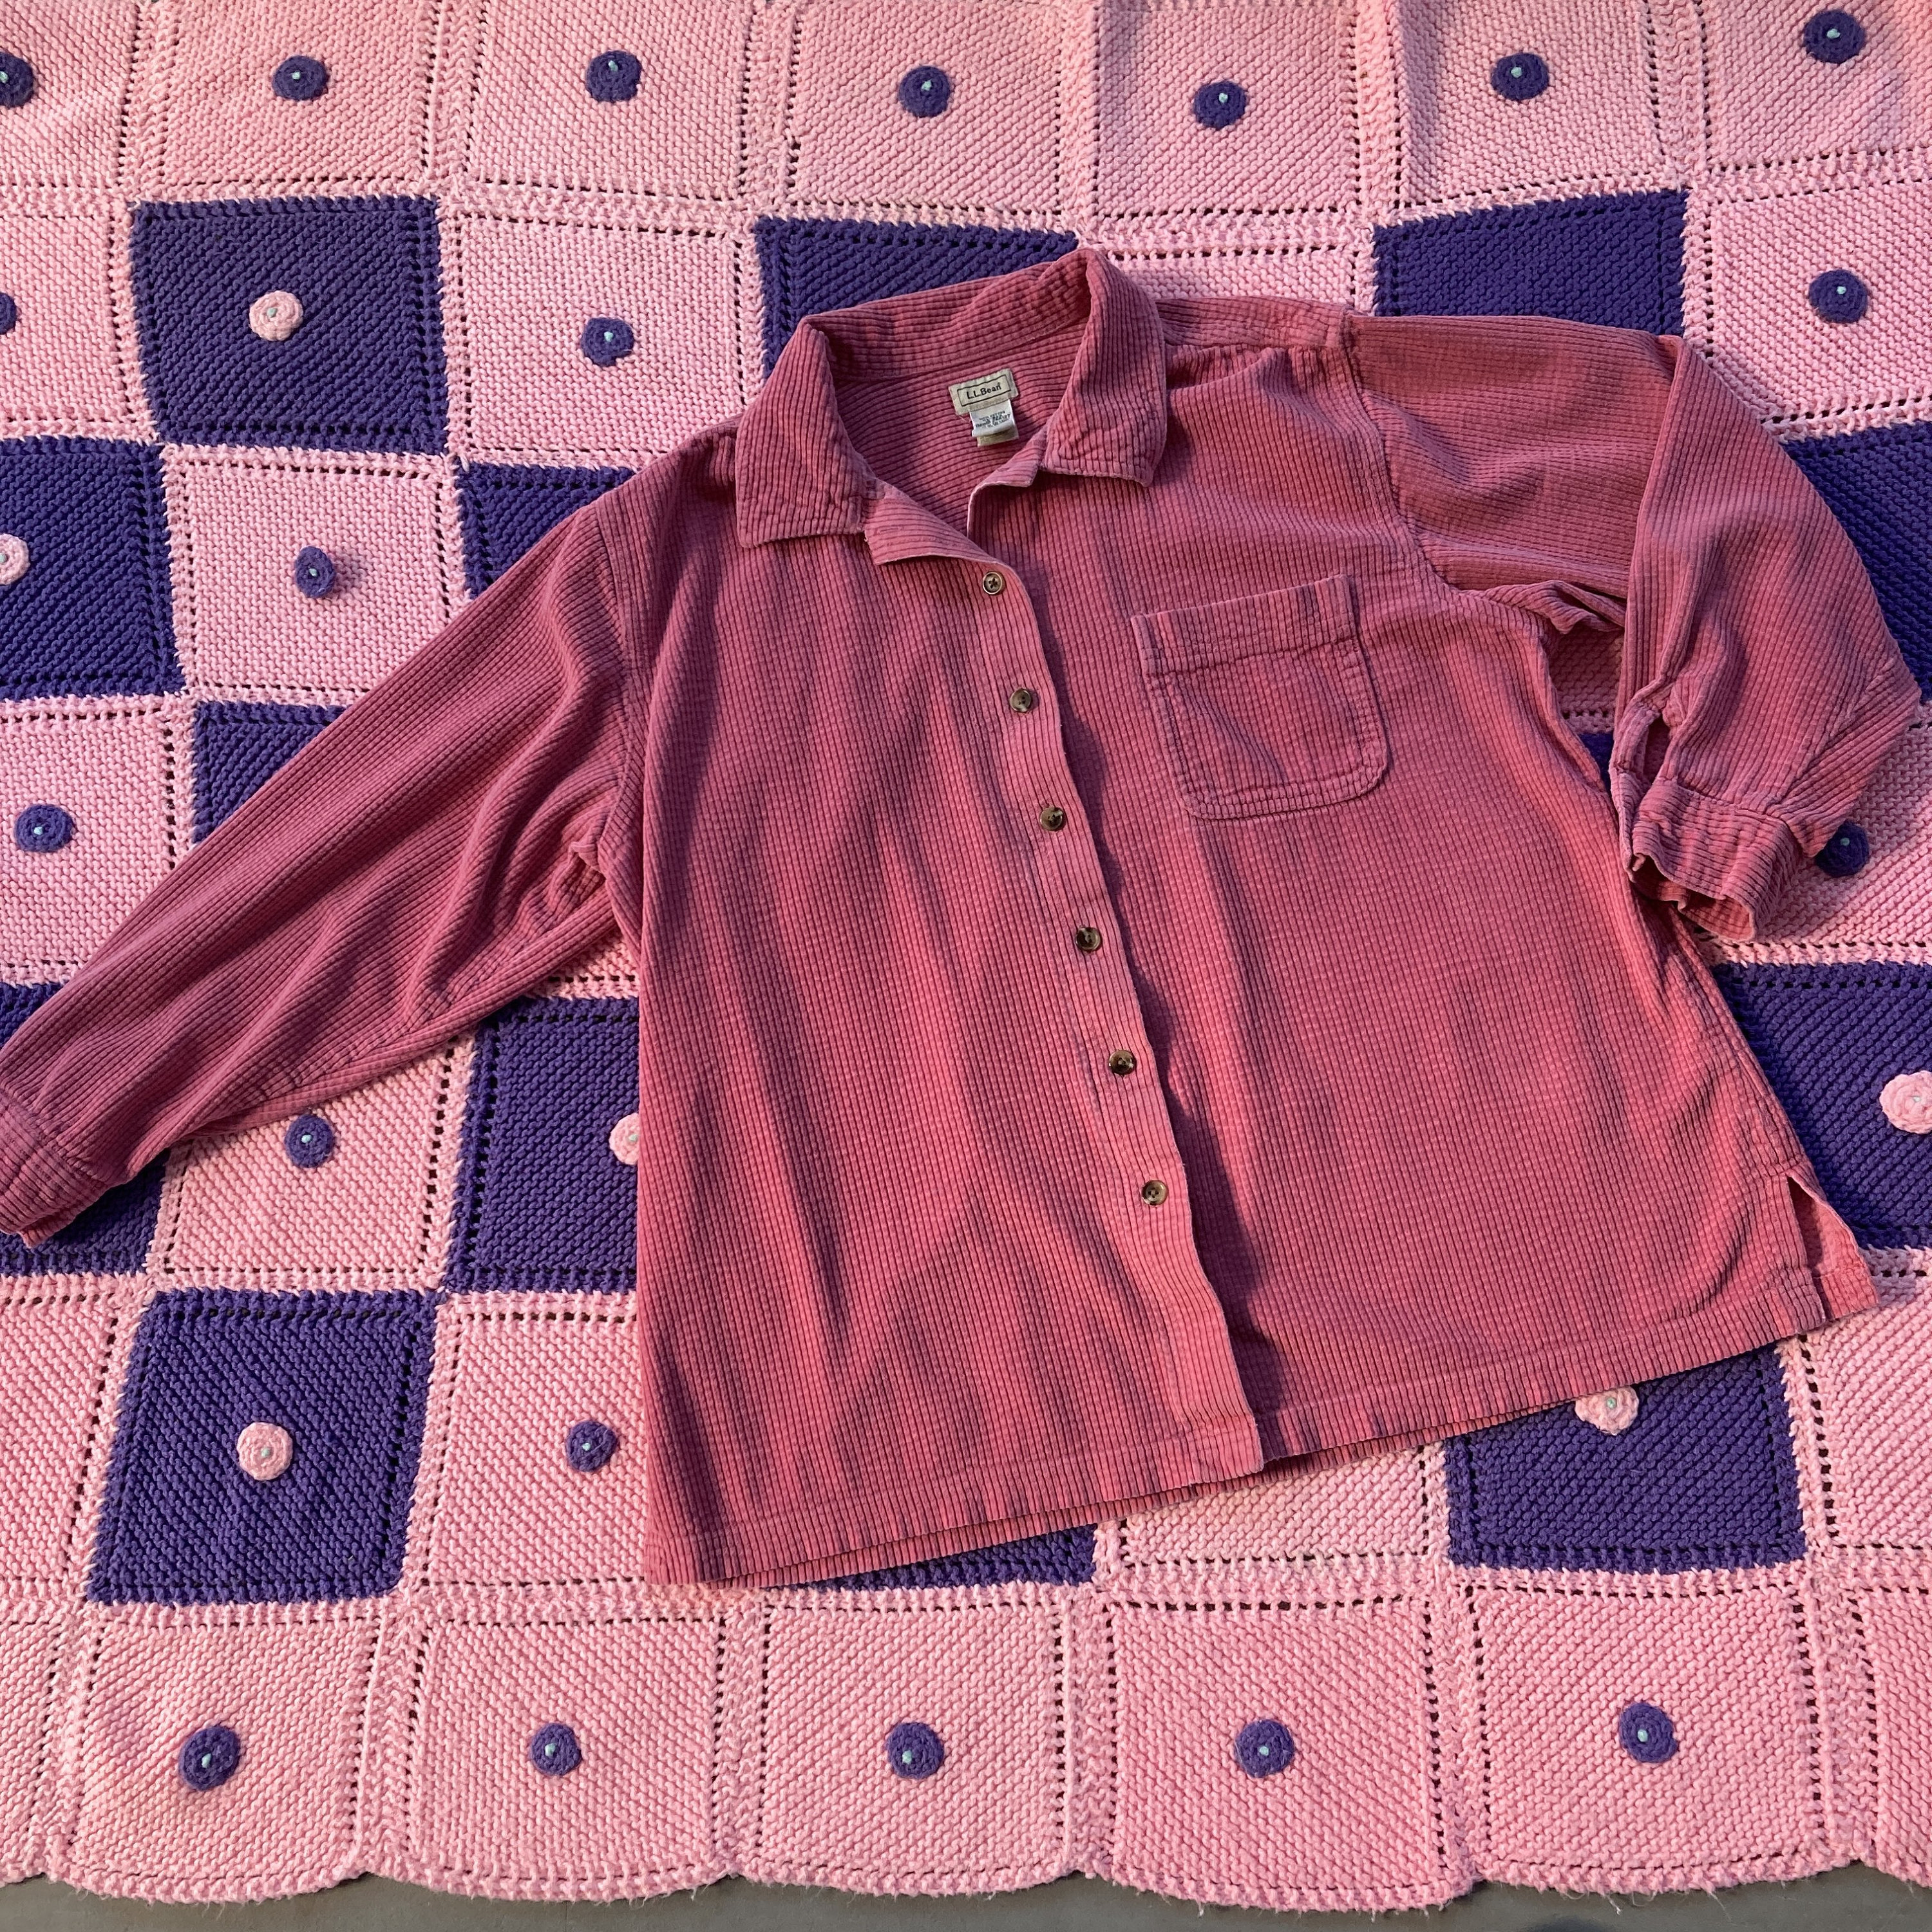 Vintage ll bean corduroy shacket shirt jacket coral pink 90s cottage core  grandma |M-XL| 1990s shirt button up wide wale